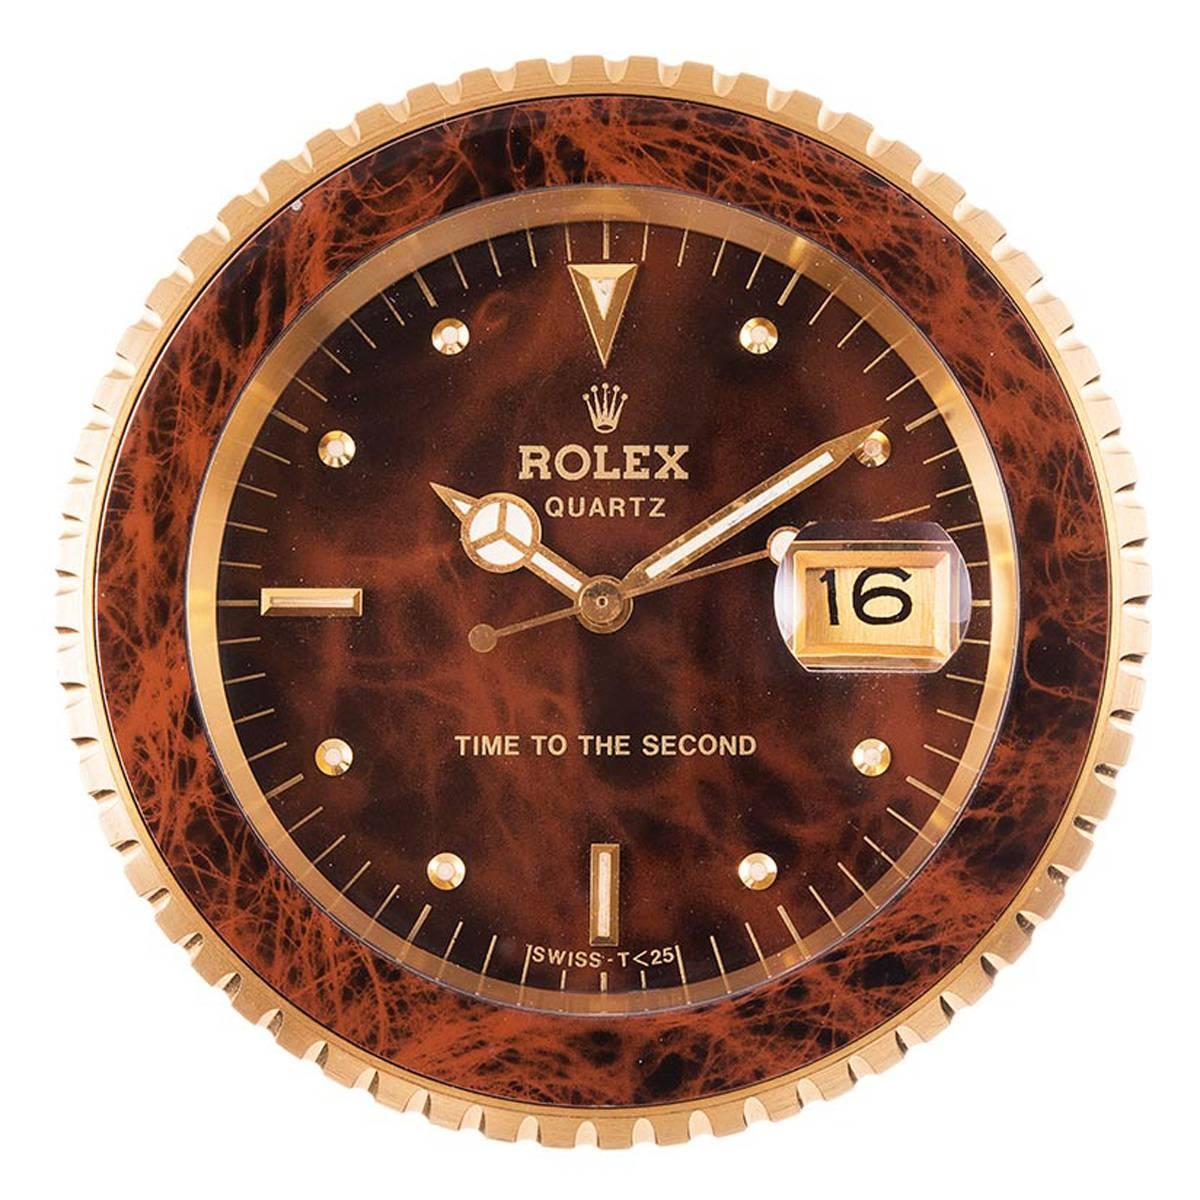 rolex-time-to-the-second-quartz-desk-clock-for-sale-at-1stdibs